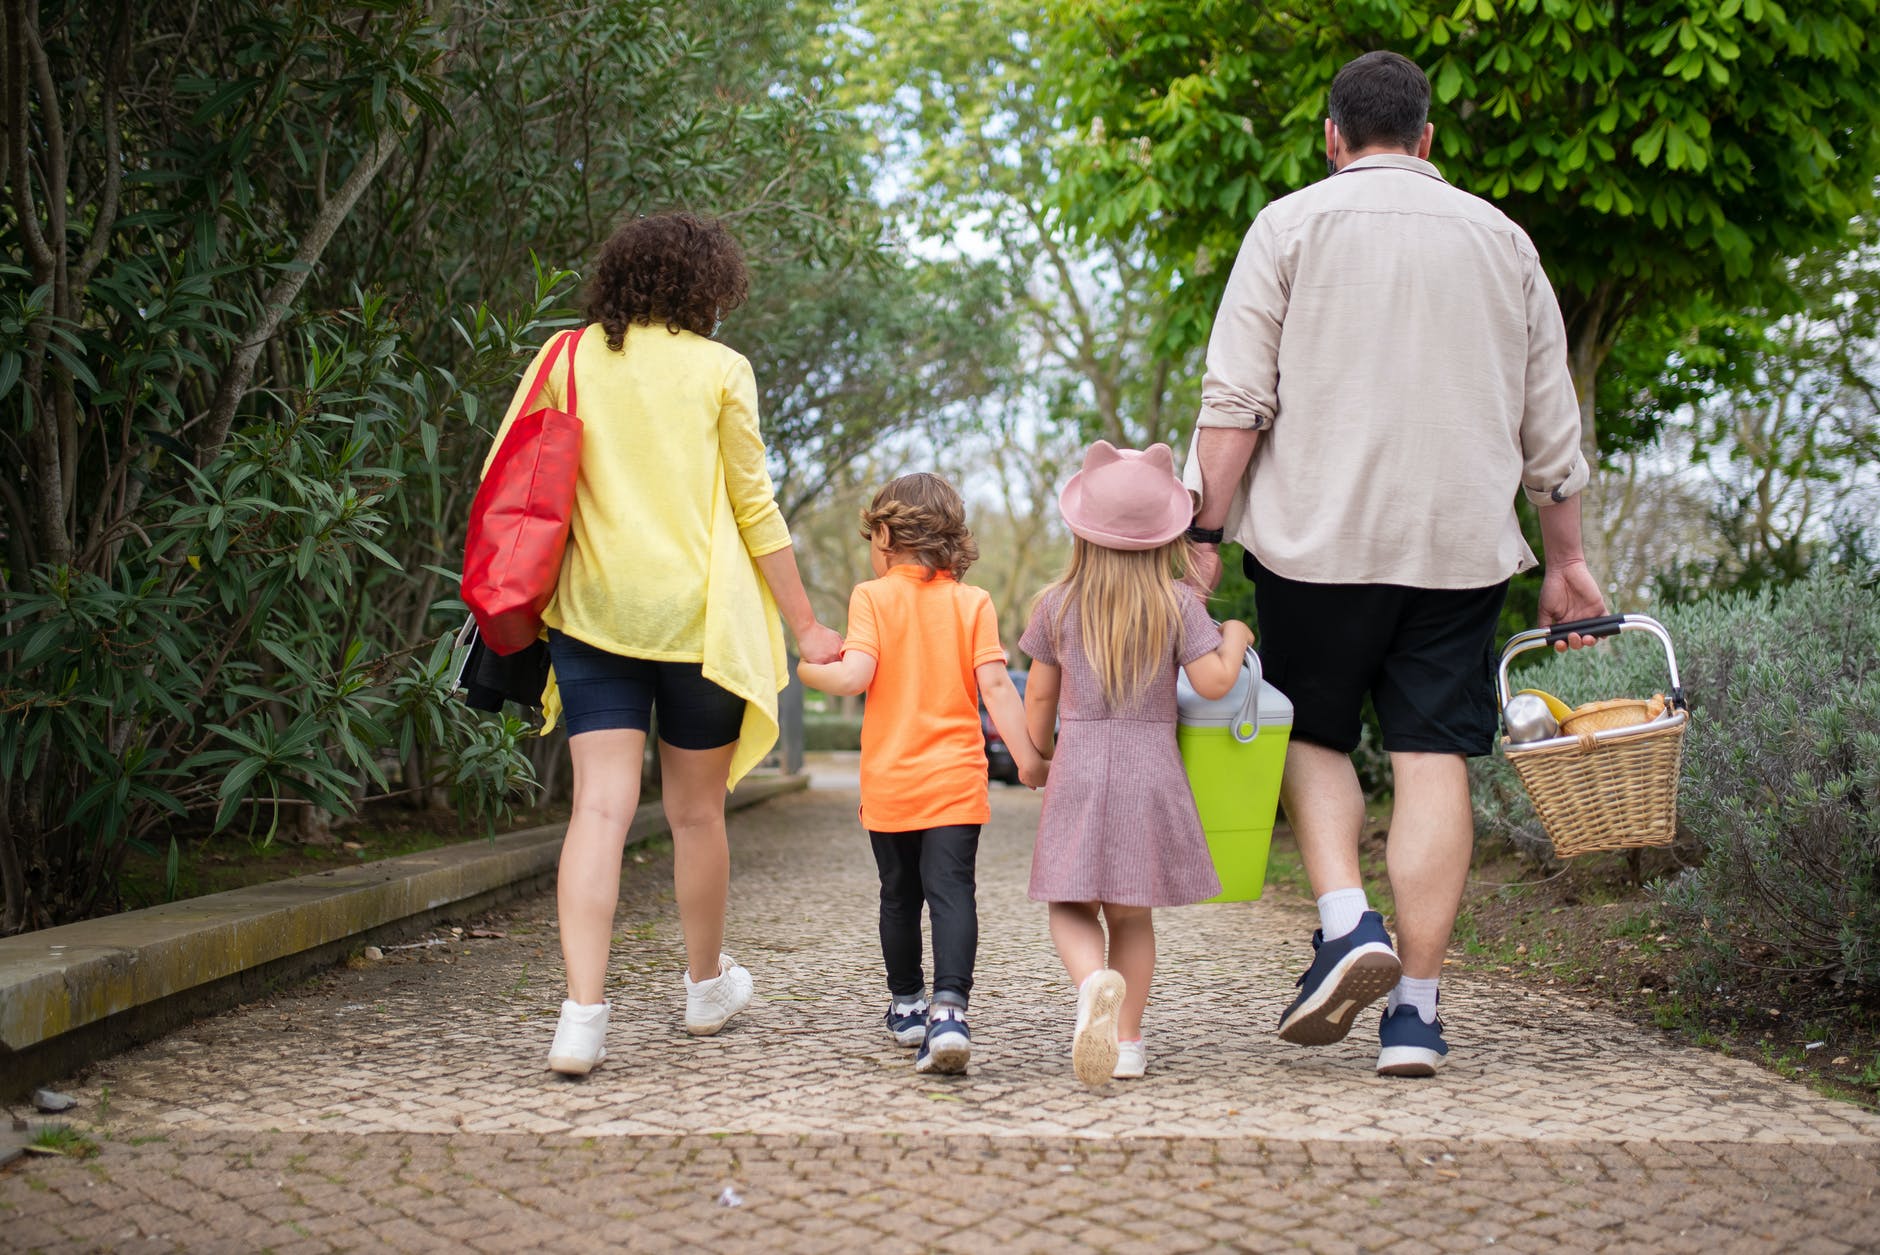 back view of a family walking together in the park